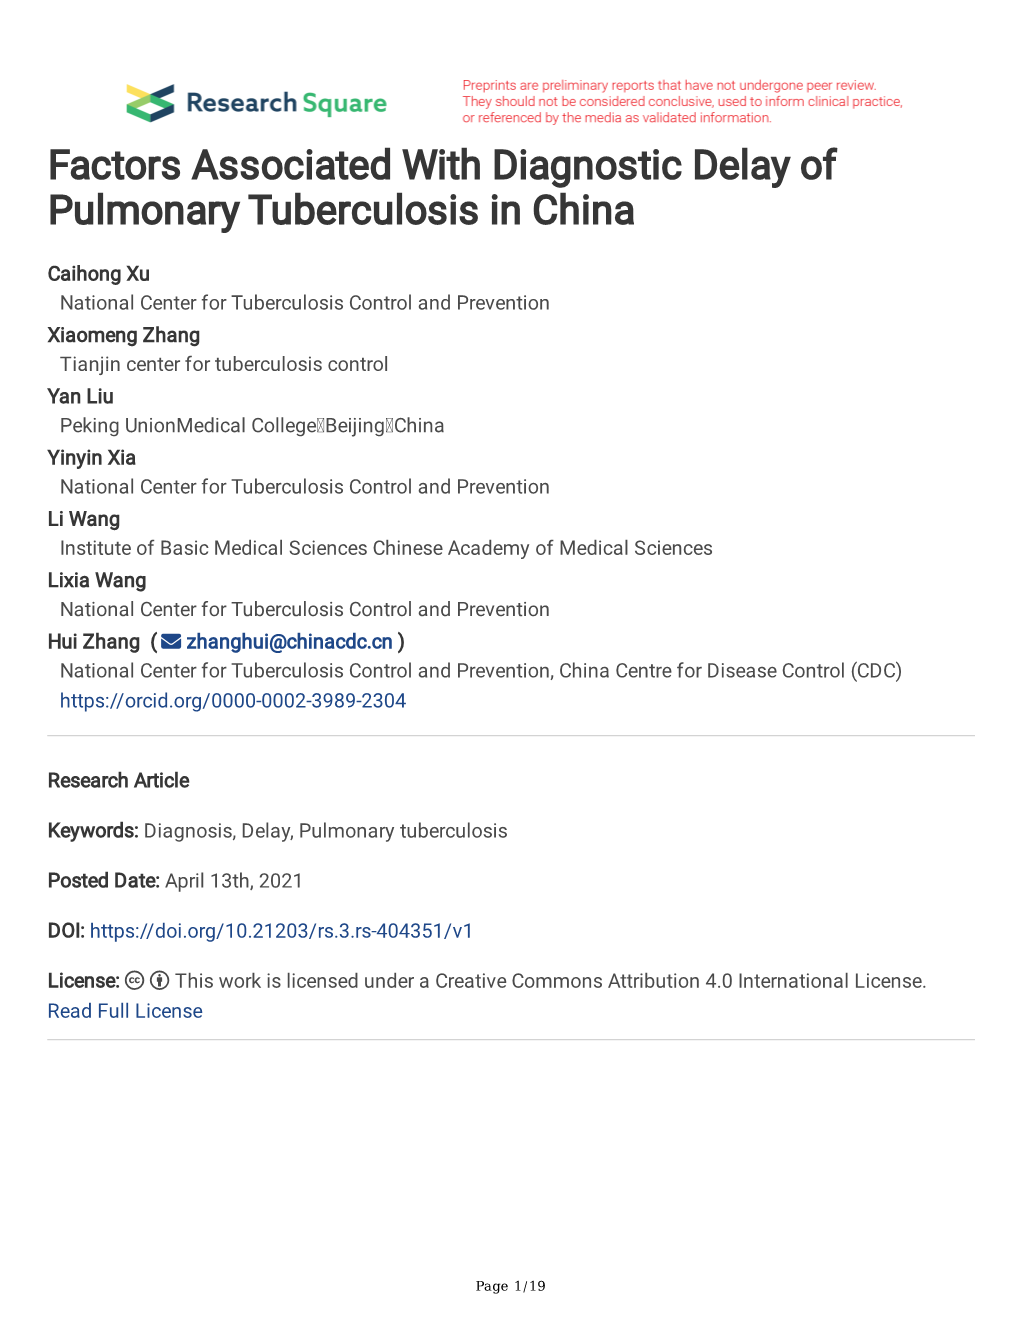 Factors Associated with Diagnostic Delay of Pulmonary Tuberculosis in China